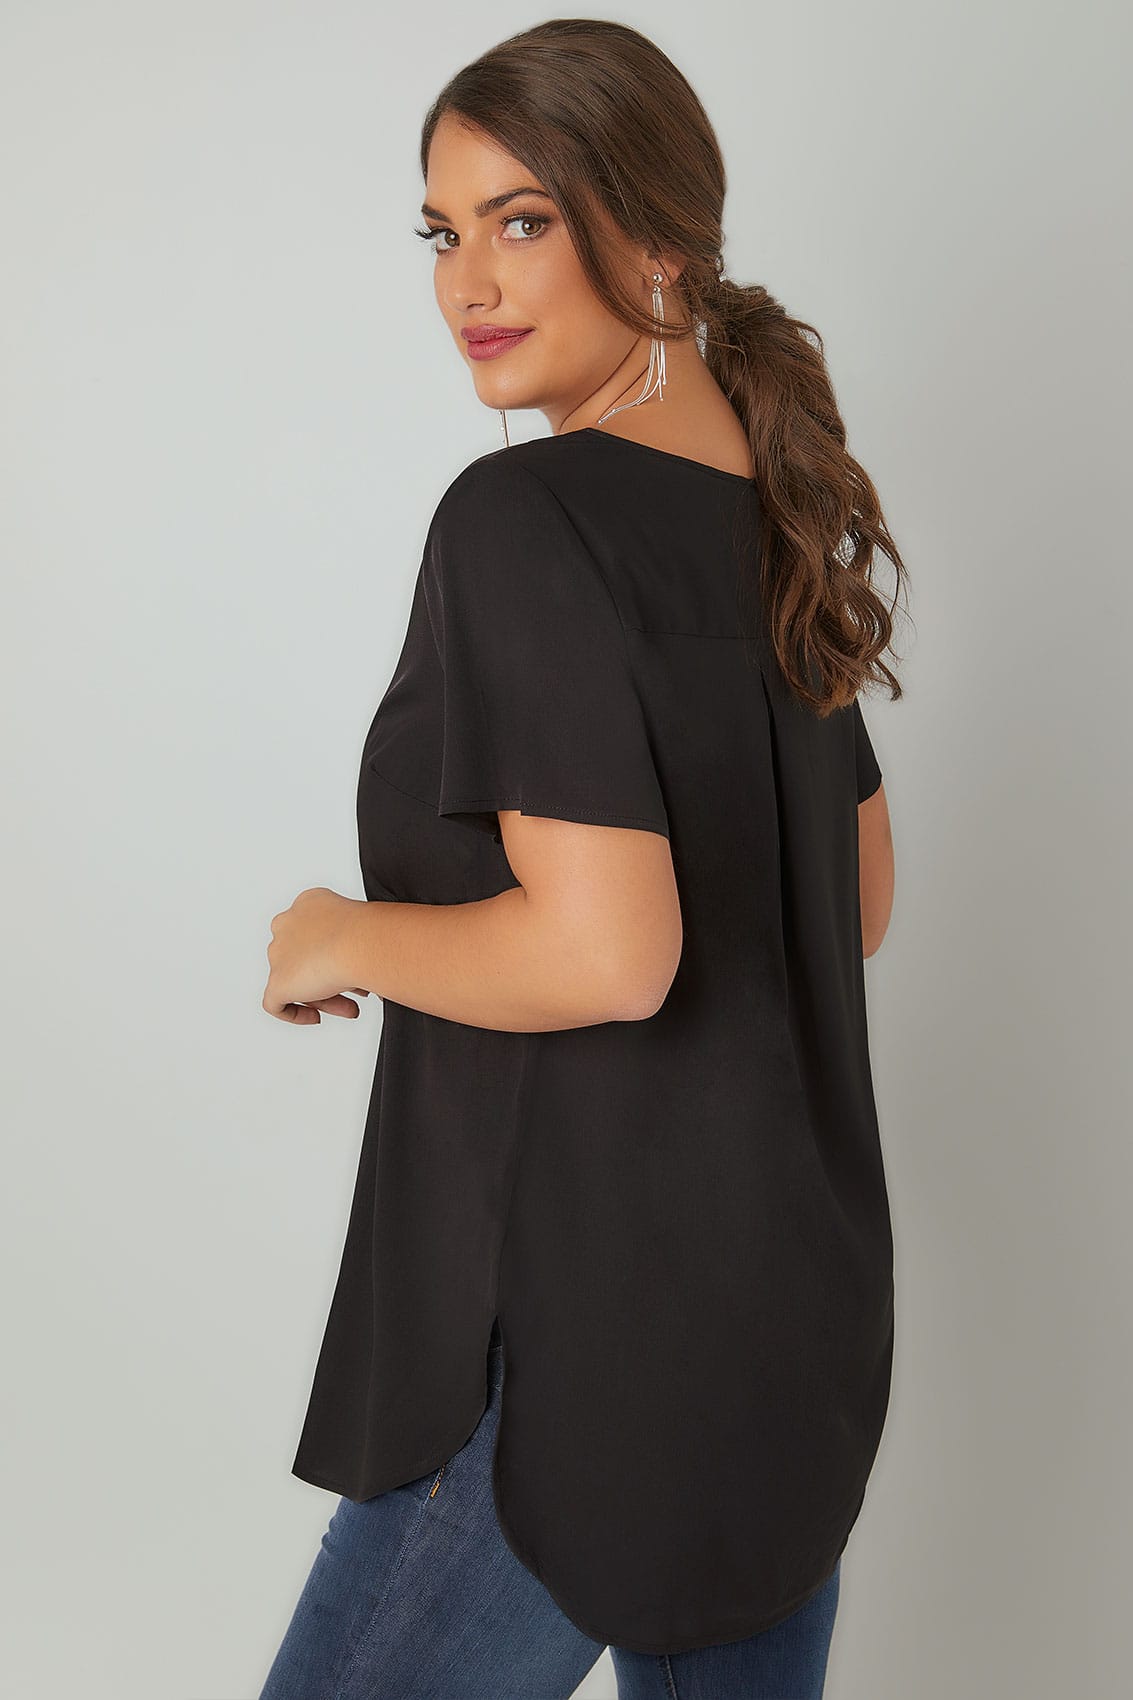 Black Woven Top With V-Neck &amp; Curved Hem Plus size 16 to 36